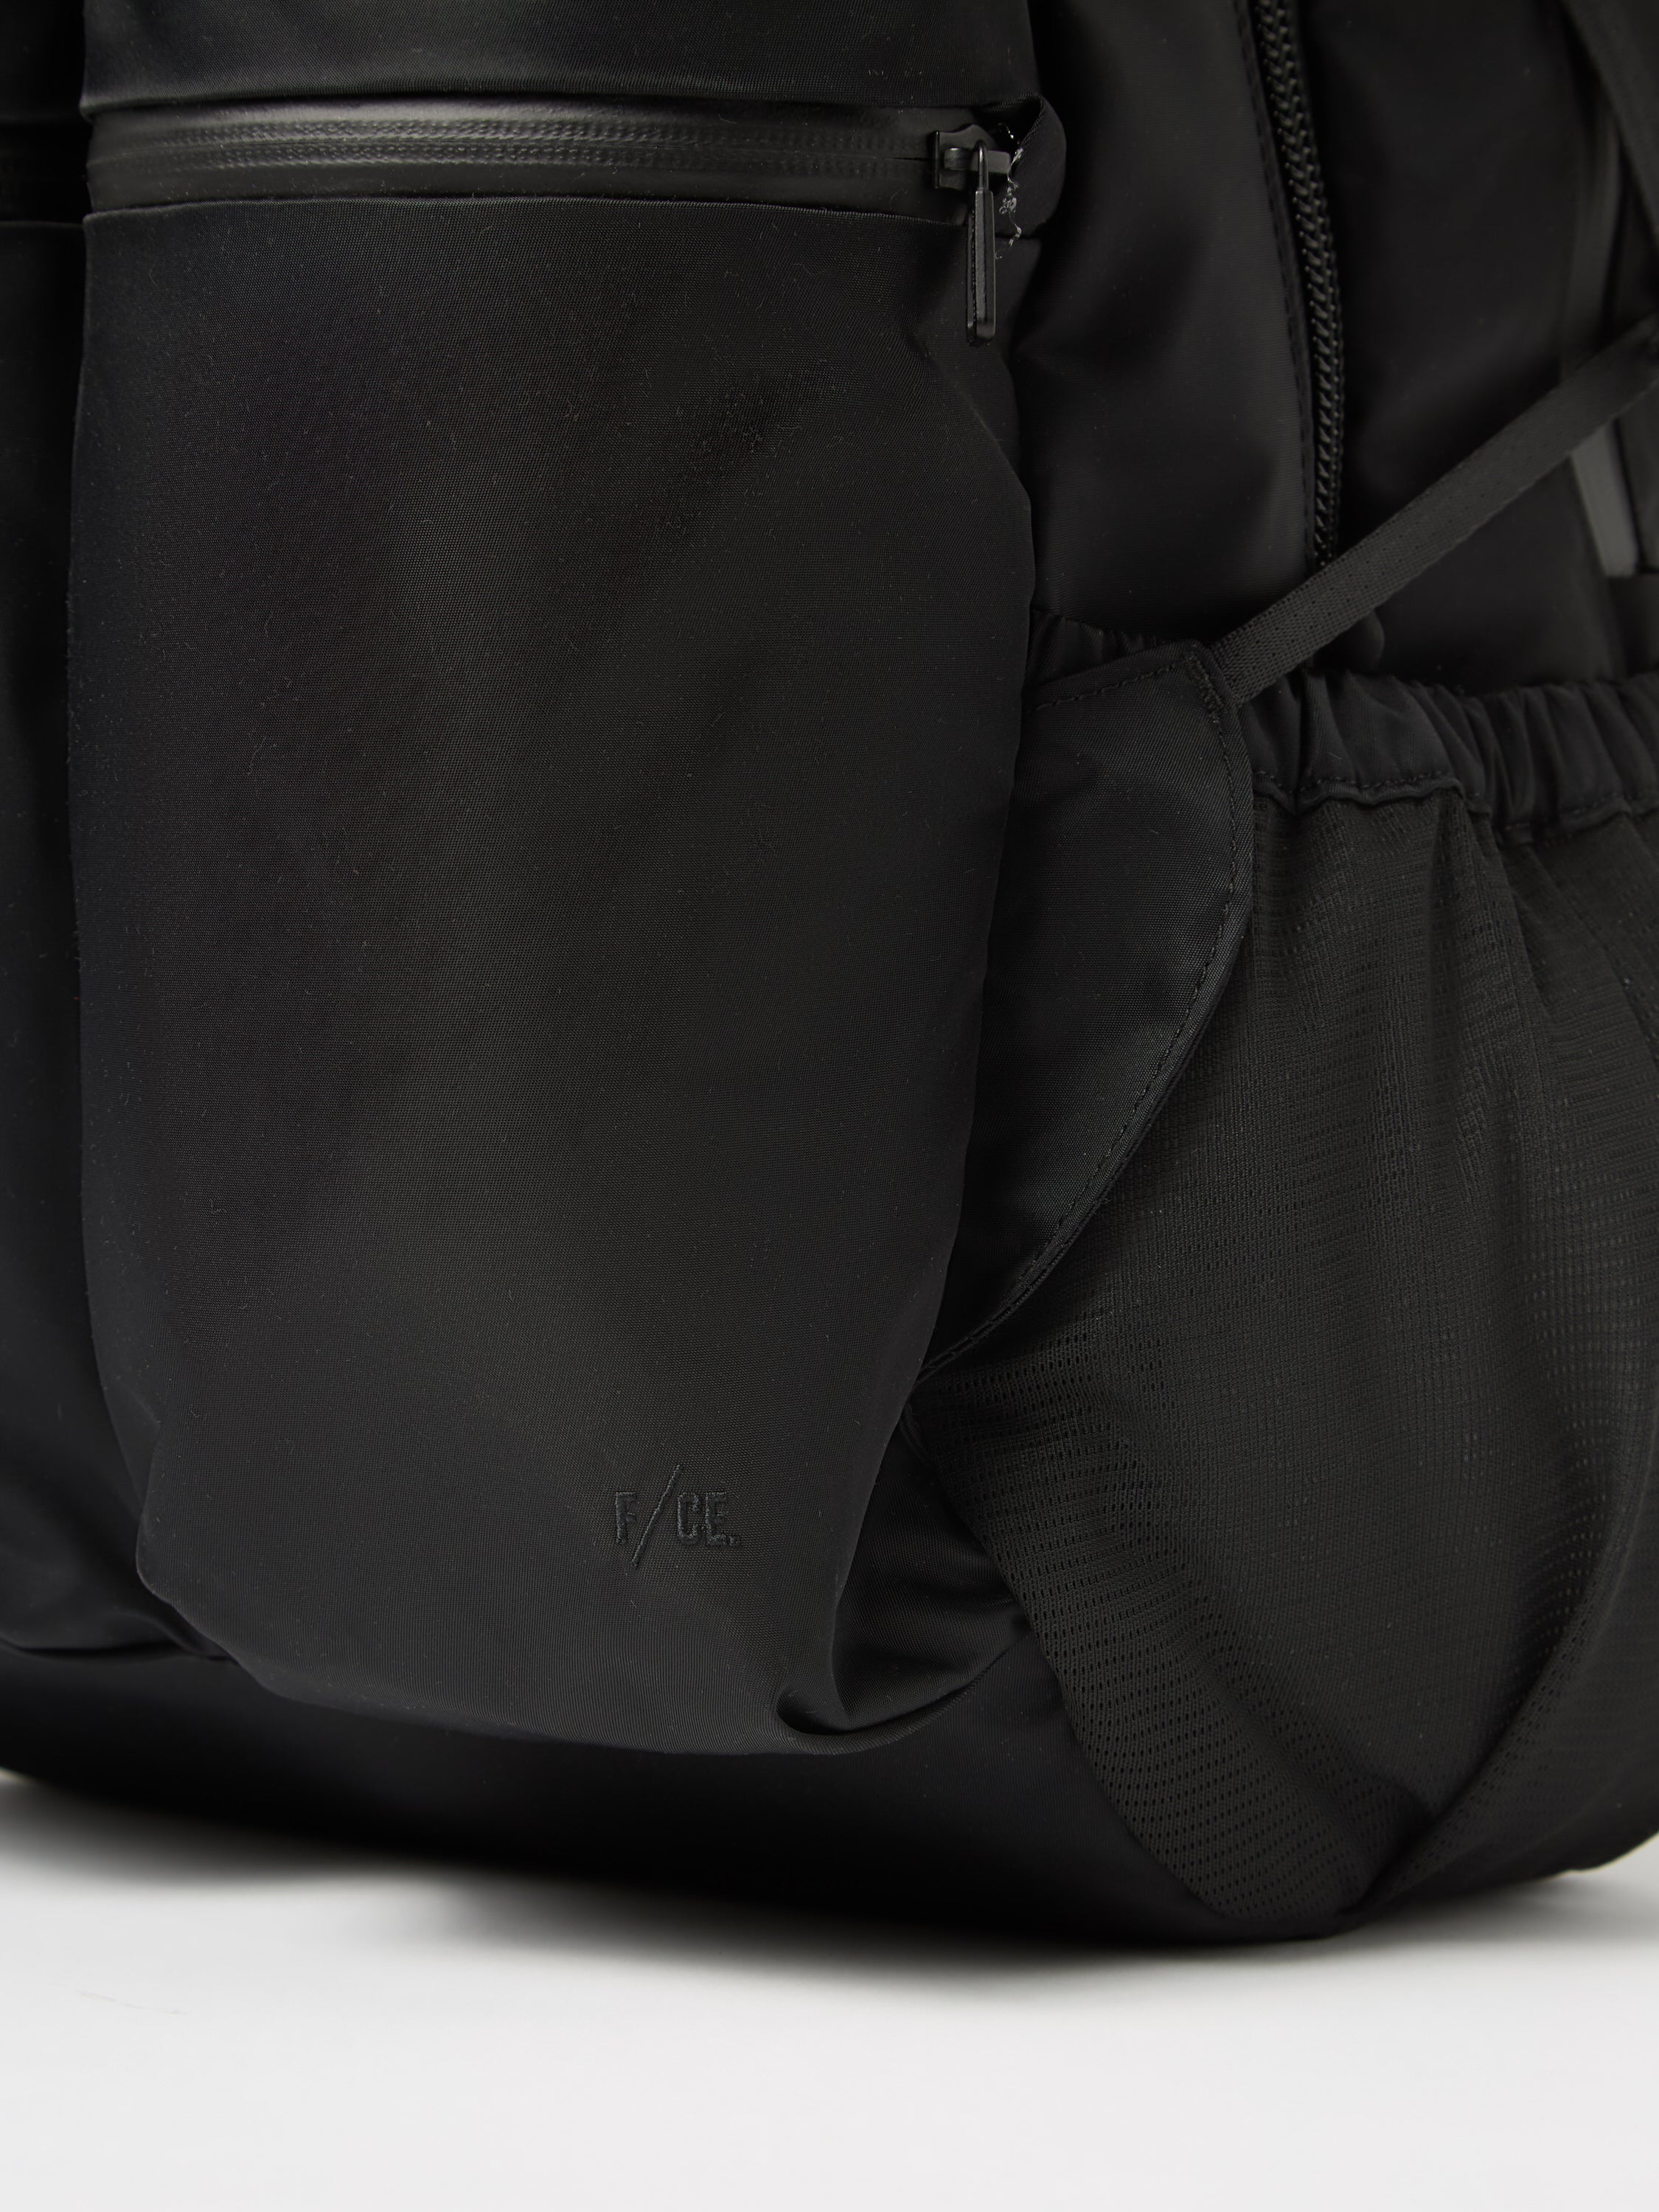 F/CE.® Urban Town Bag in Black Recycled Twill Nylon